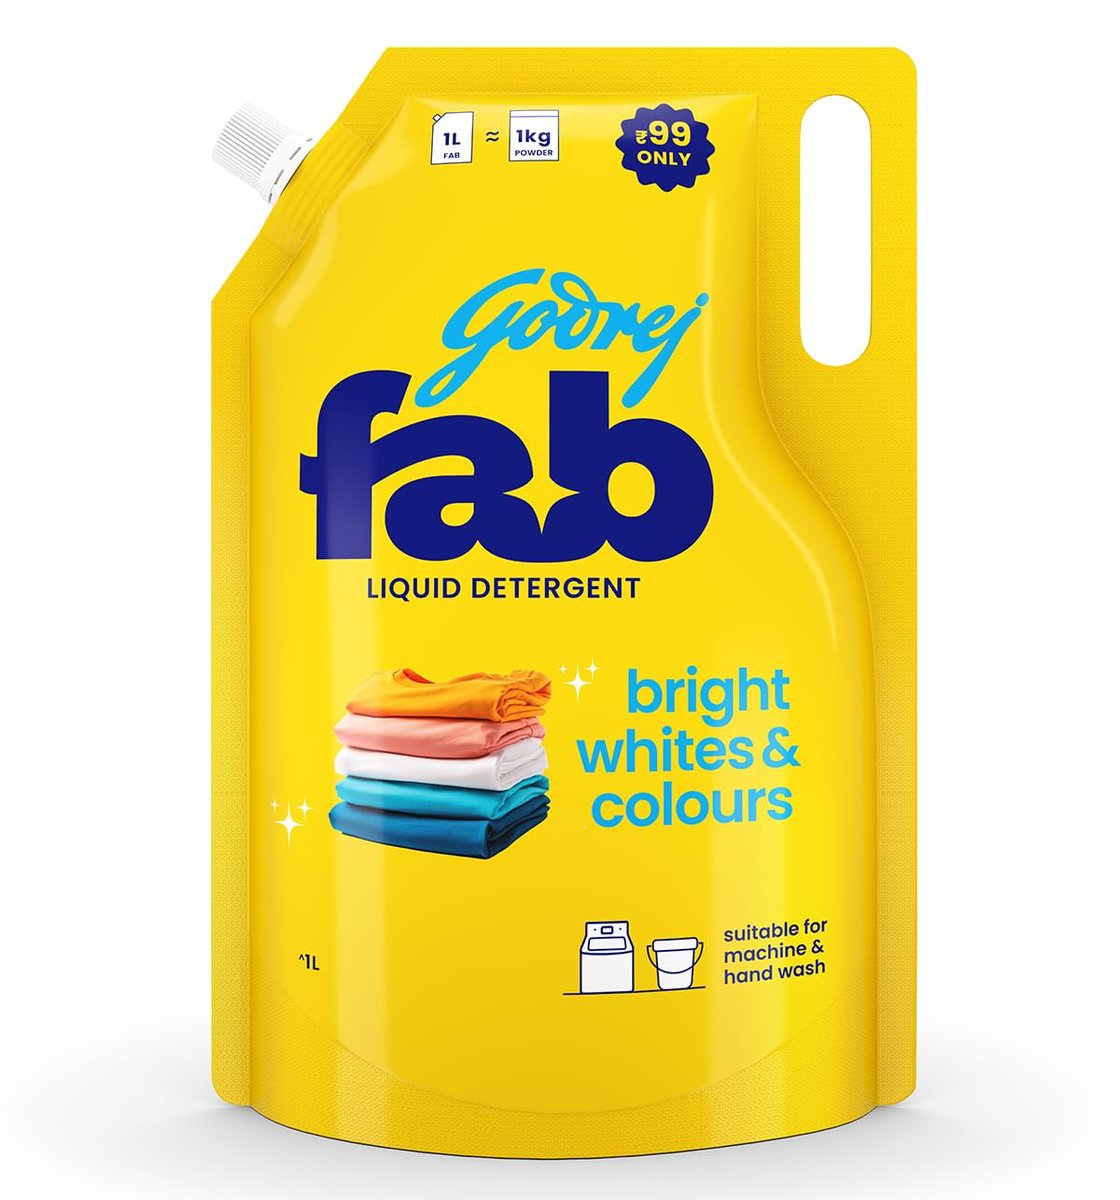 LOOT Godrej Fab Liquid Detergent Refill 1liter at Rs.99 only + Rs.100 cashback fforfree.net/2024/05/loot-g…  

#contestalert #giveaway #free #freesamples #giveawayalert #GiveawayIndia #LOOT #Godrej #washing #dirty #rain #clean
#1 #Contest, #Deals #Freebies site #fforfree  #HeavyRain